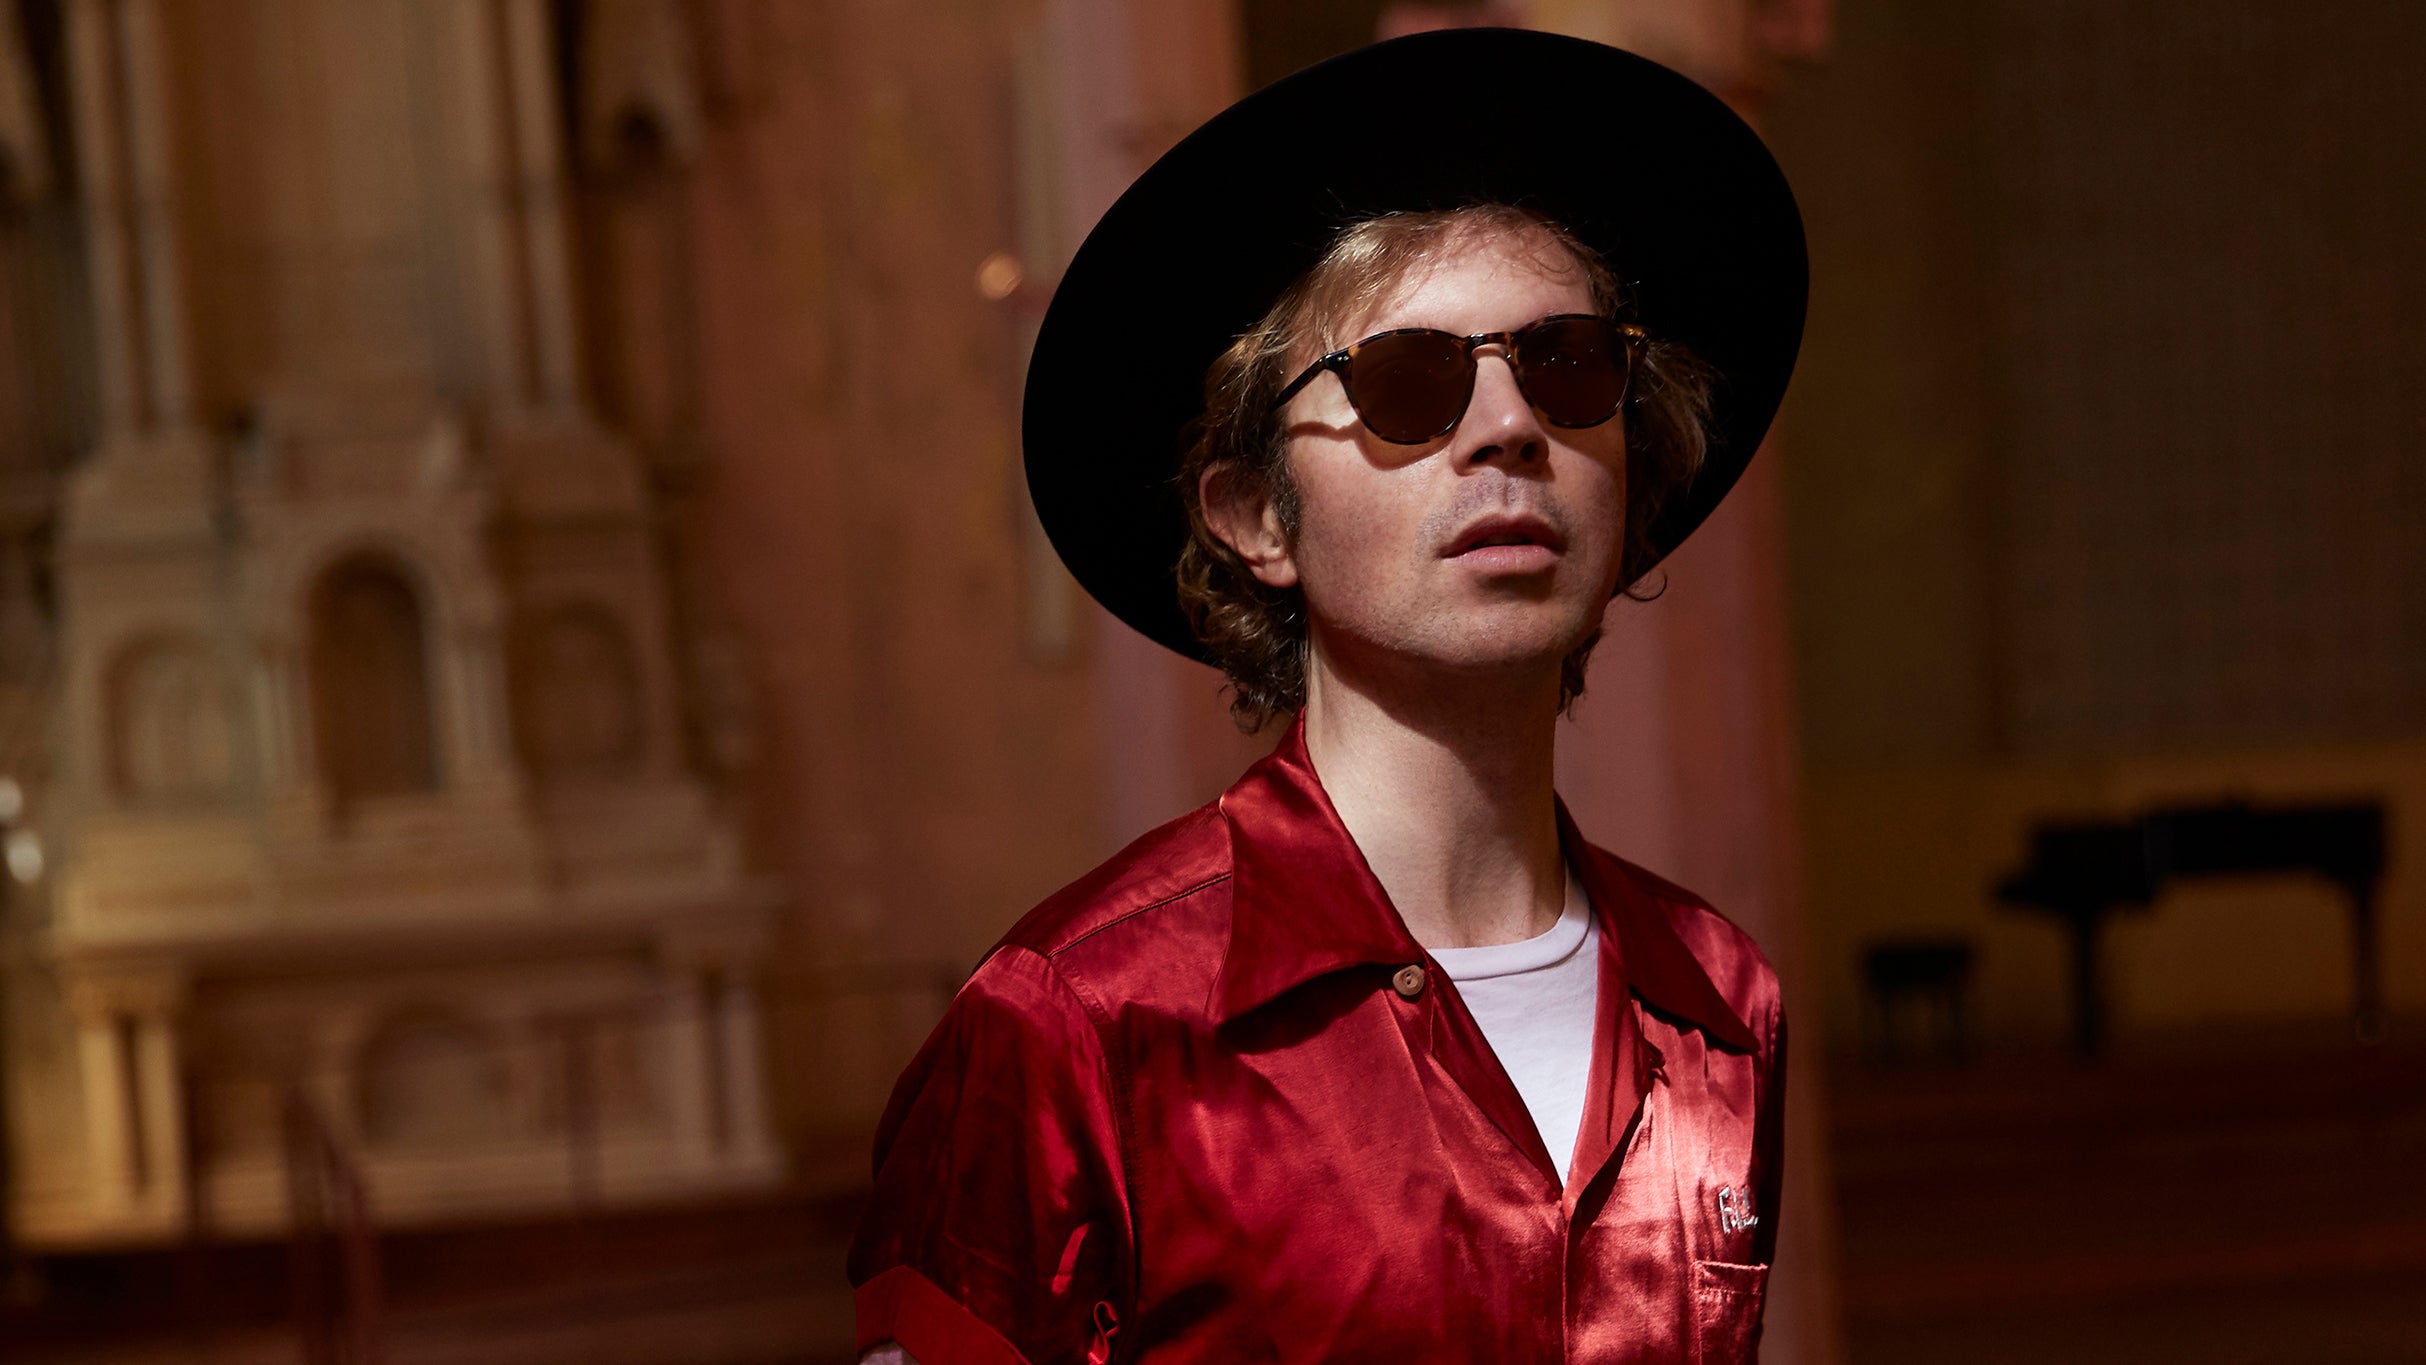 Beck & Phoenix: Summer Odyssey at Concord Pavilion